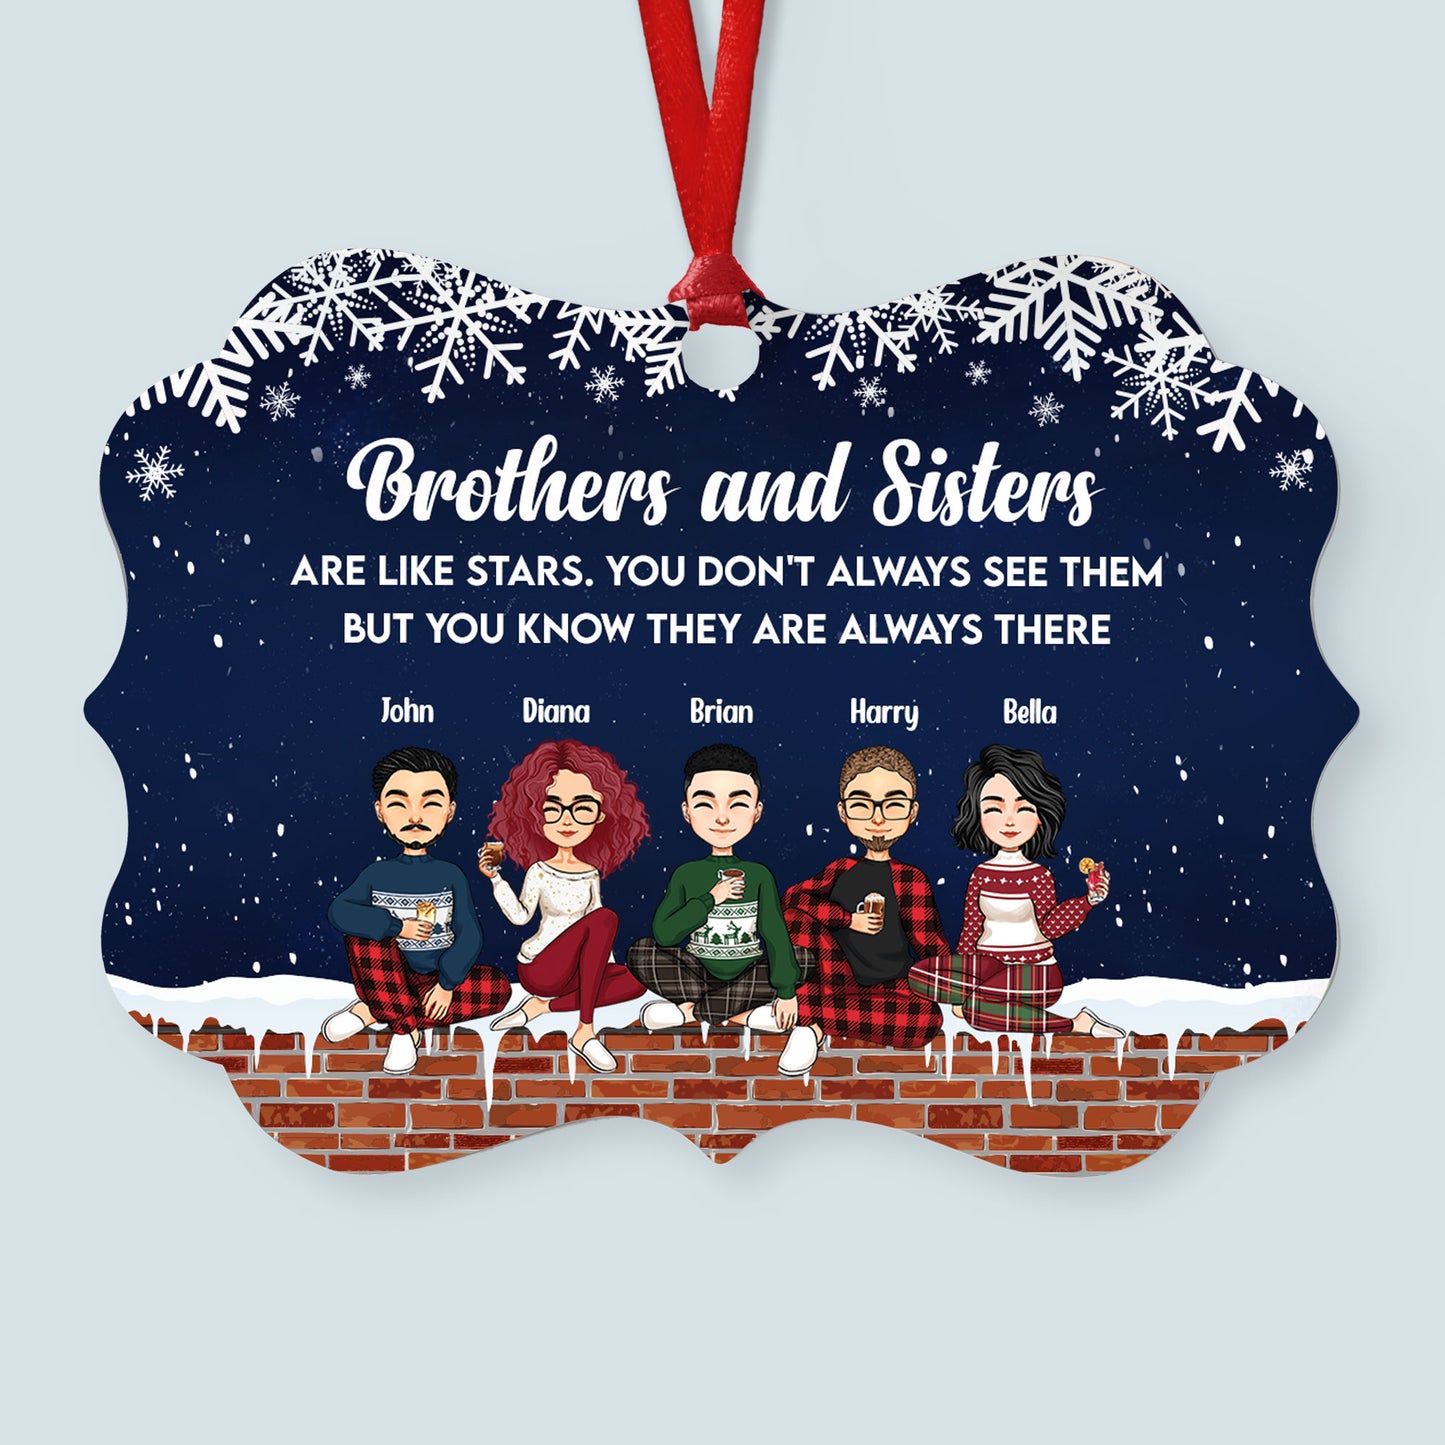 Siblings, Good Friends Are Like Stars - Personalized Aluminum/Wooden Ornament - Christmas Gift For Siblings, Friends